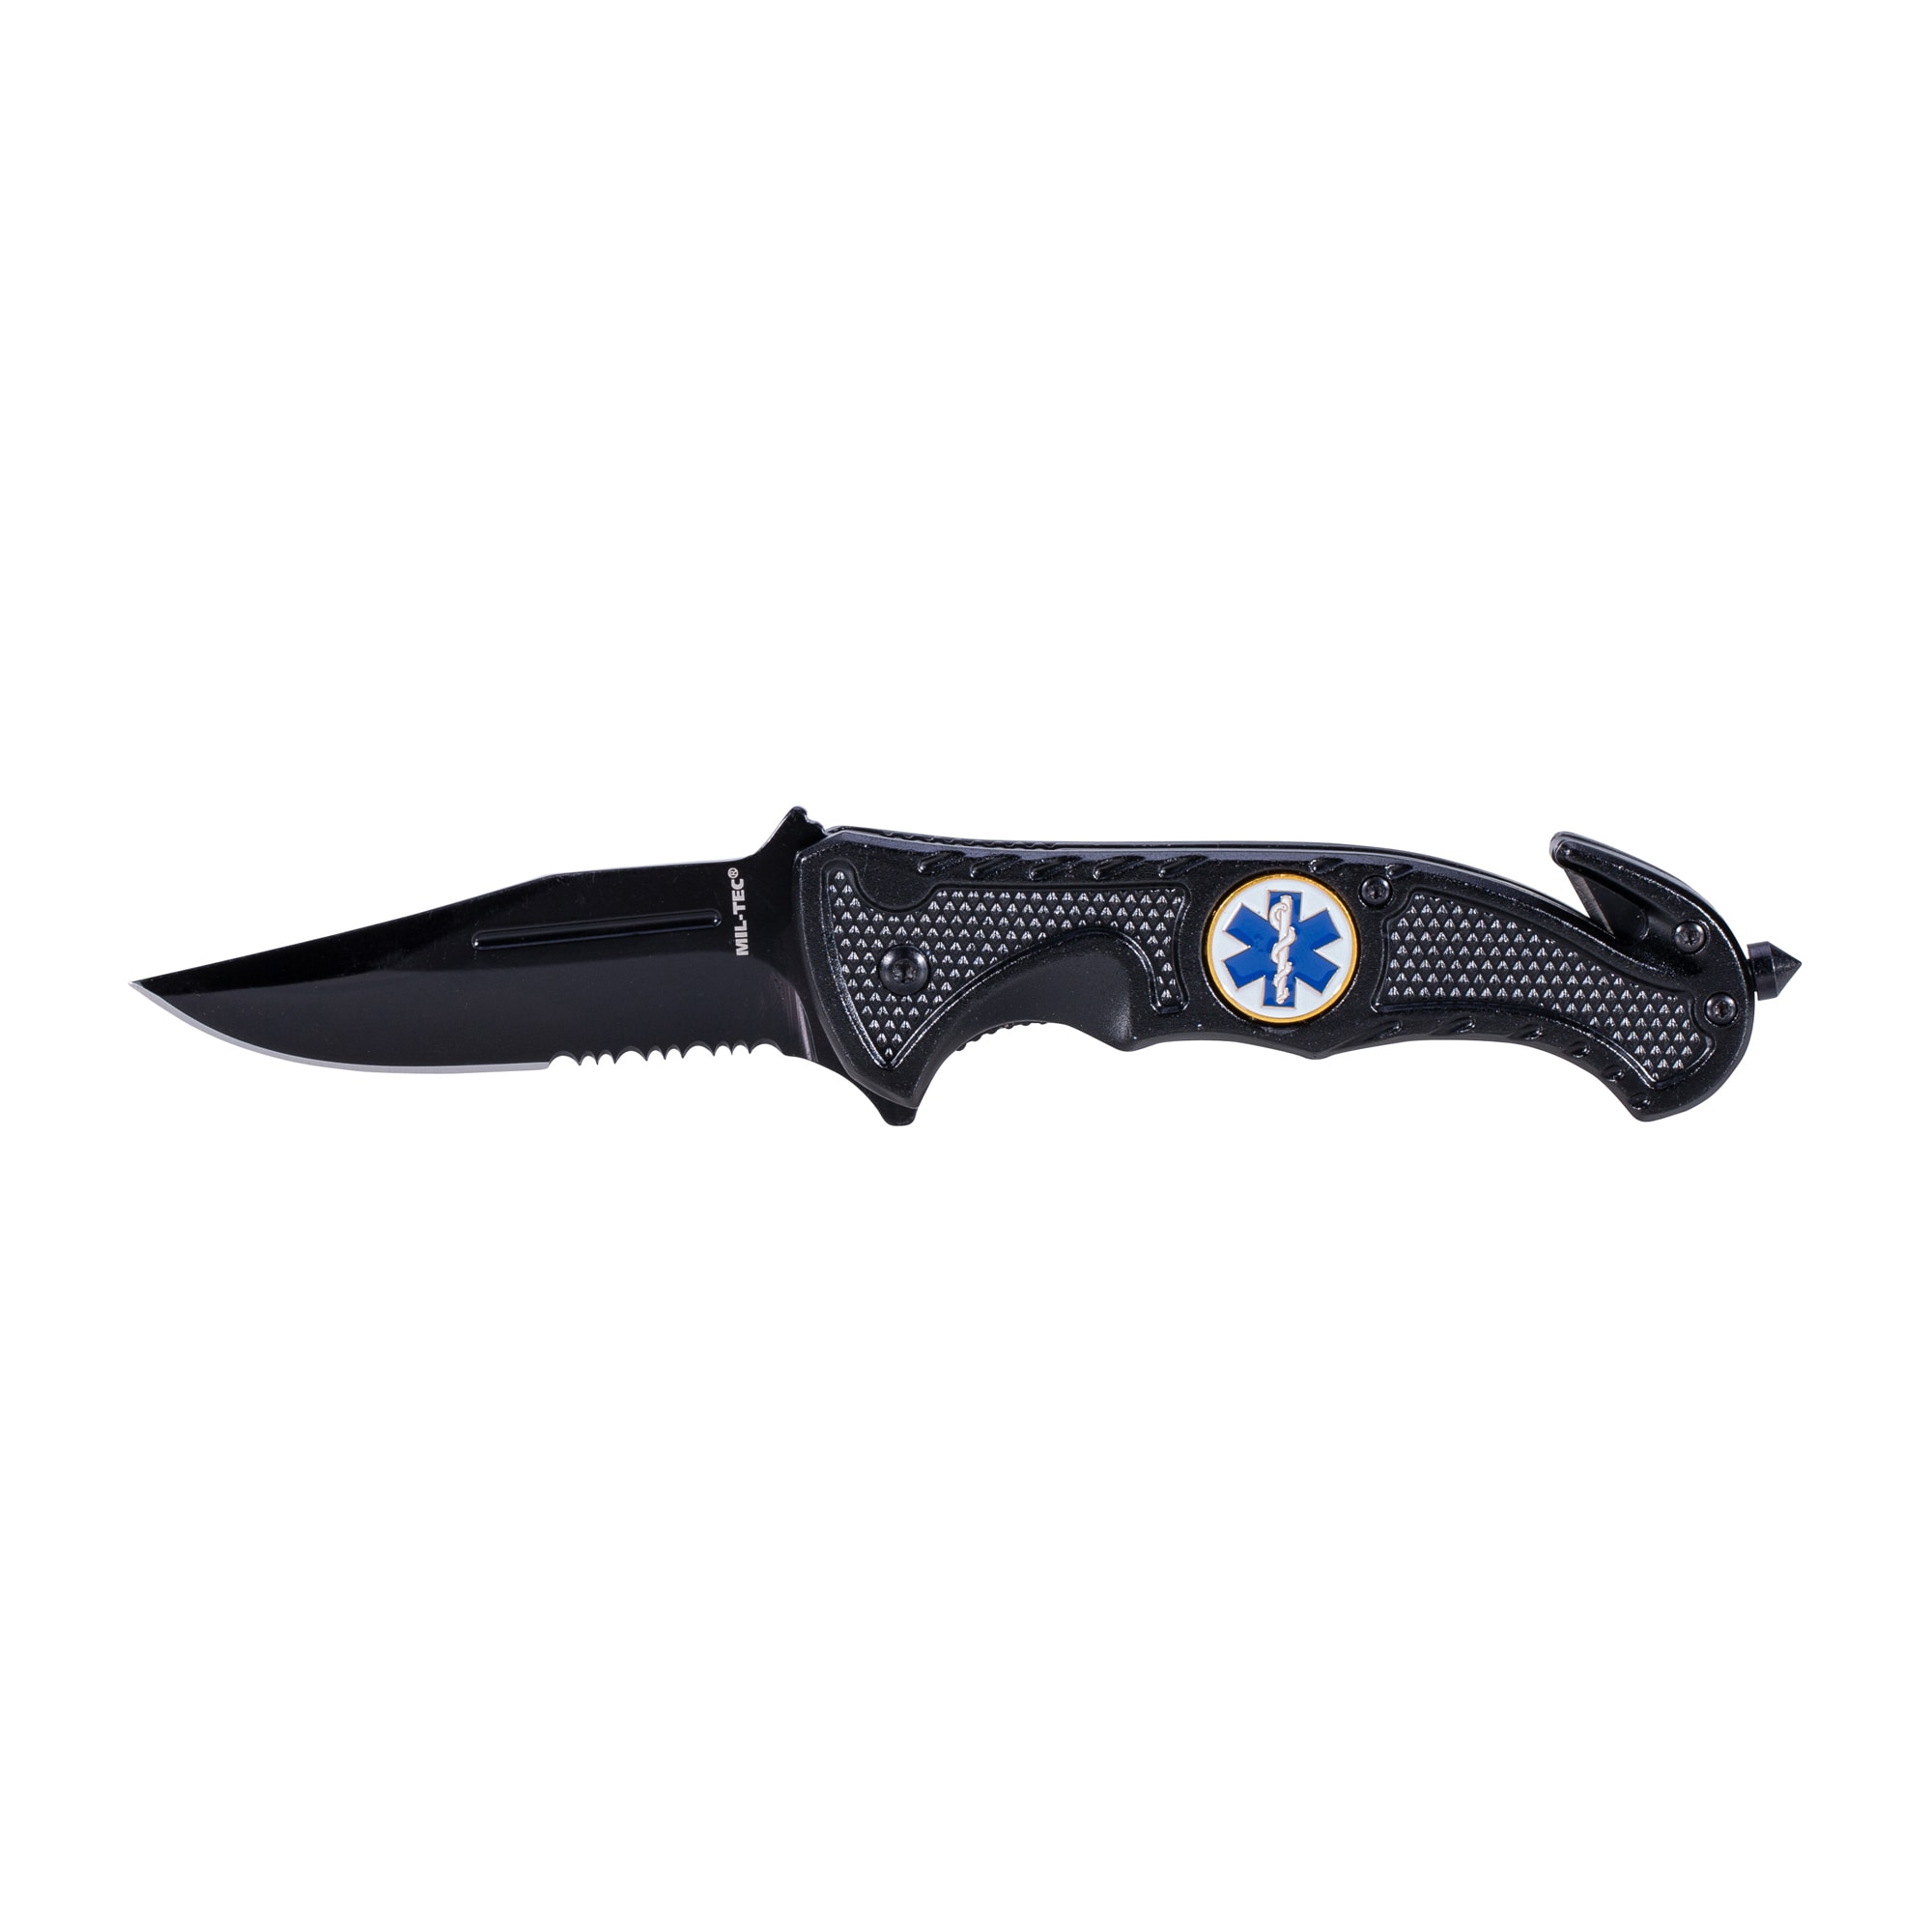 Purchase the Mil-Tec Rescue Knife black by ASMC